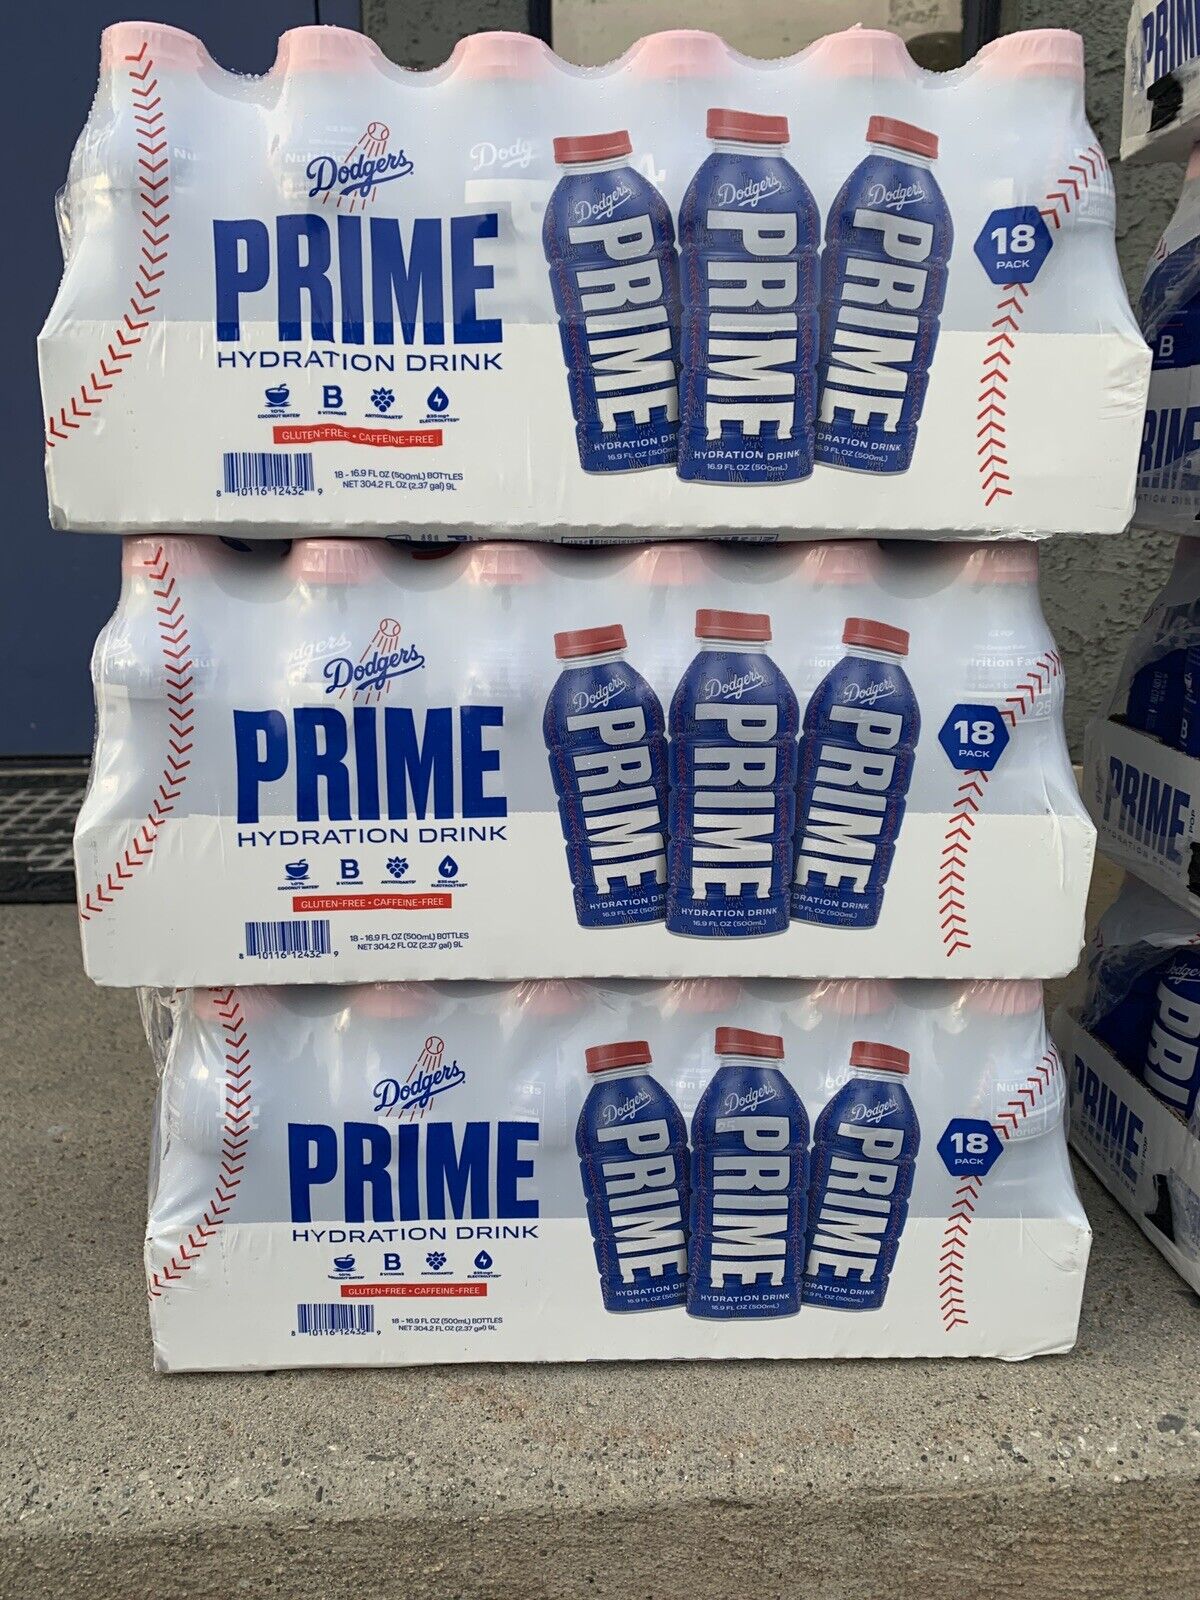 SUPER RARE LA dodger Prime Hydration Drink 18 PACK BUBBLE WRAPPED FAST SHIPPING